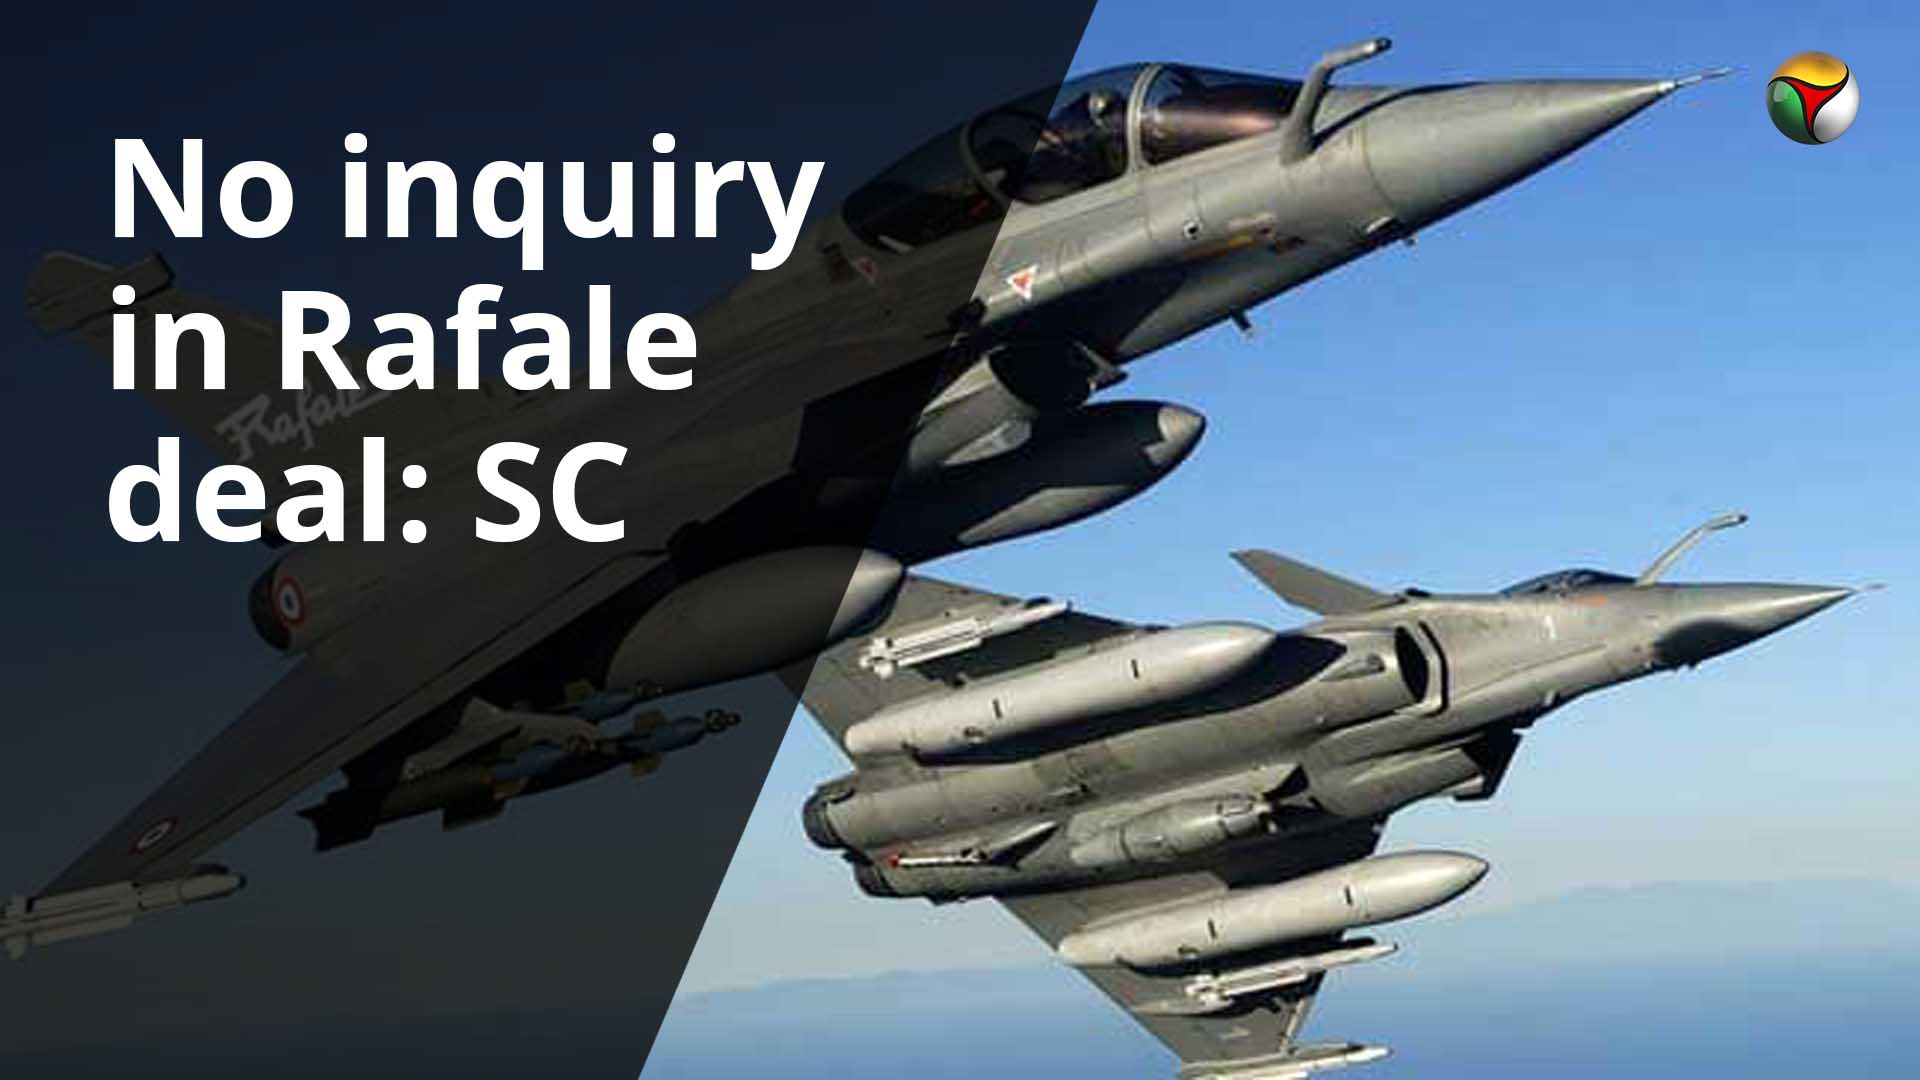 Supreme Court dismisses review petitions on Rafale deal